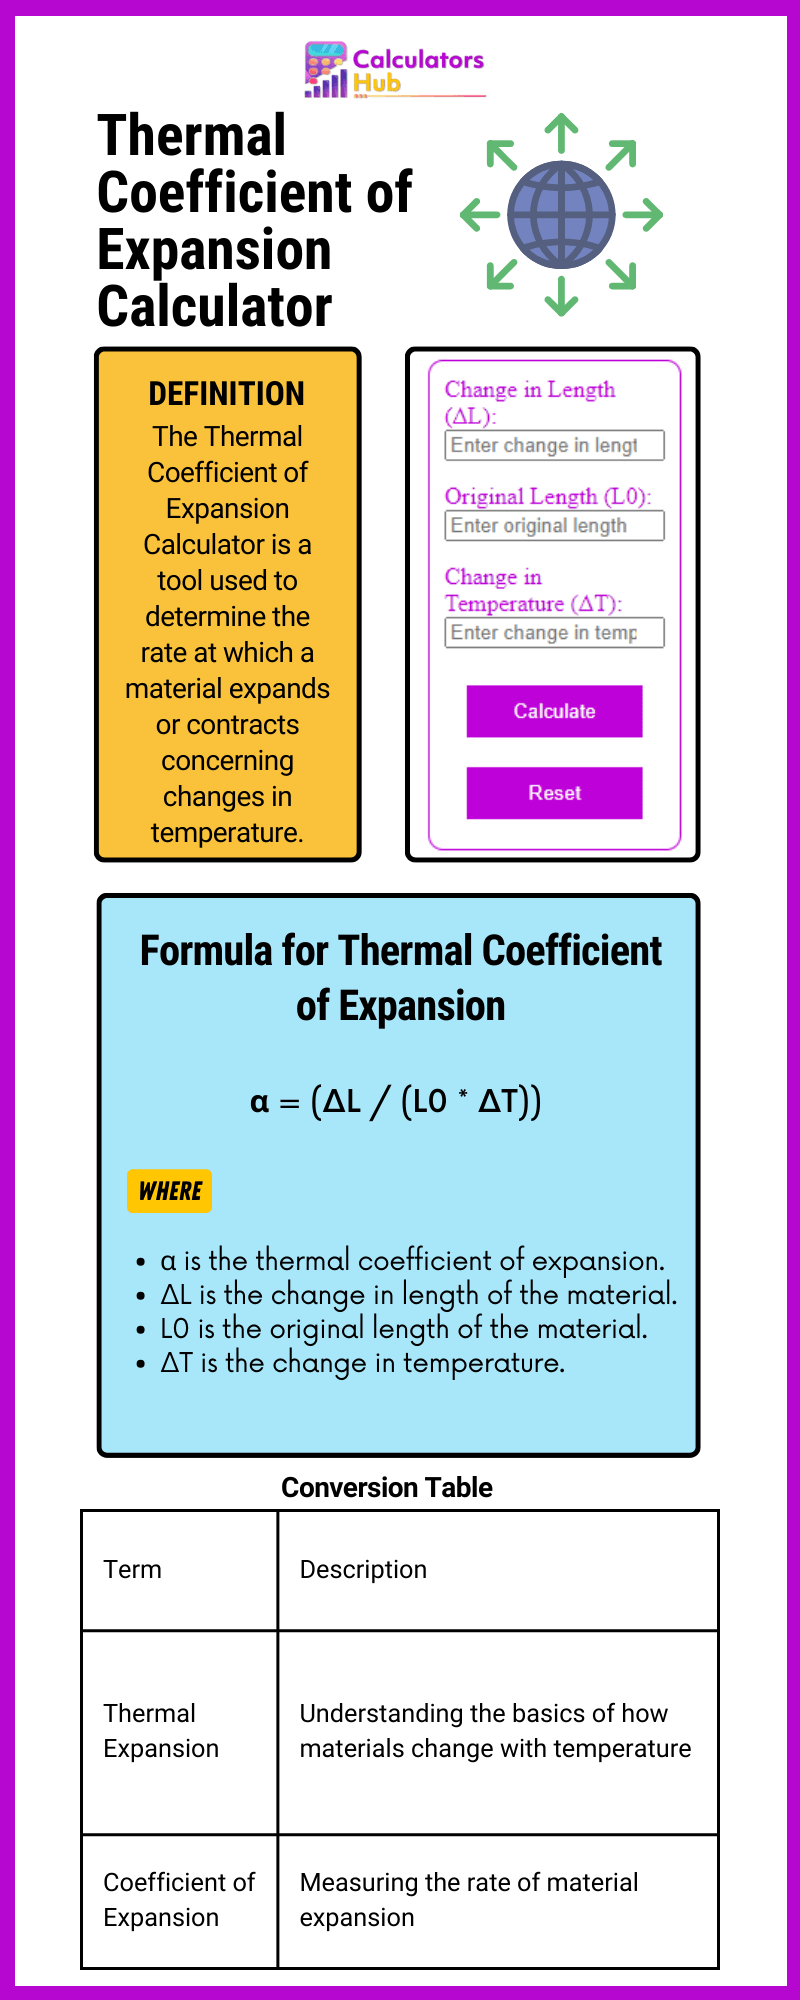 Thermal Coefficient of Expansion Calculator